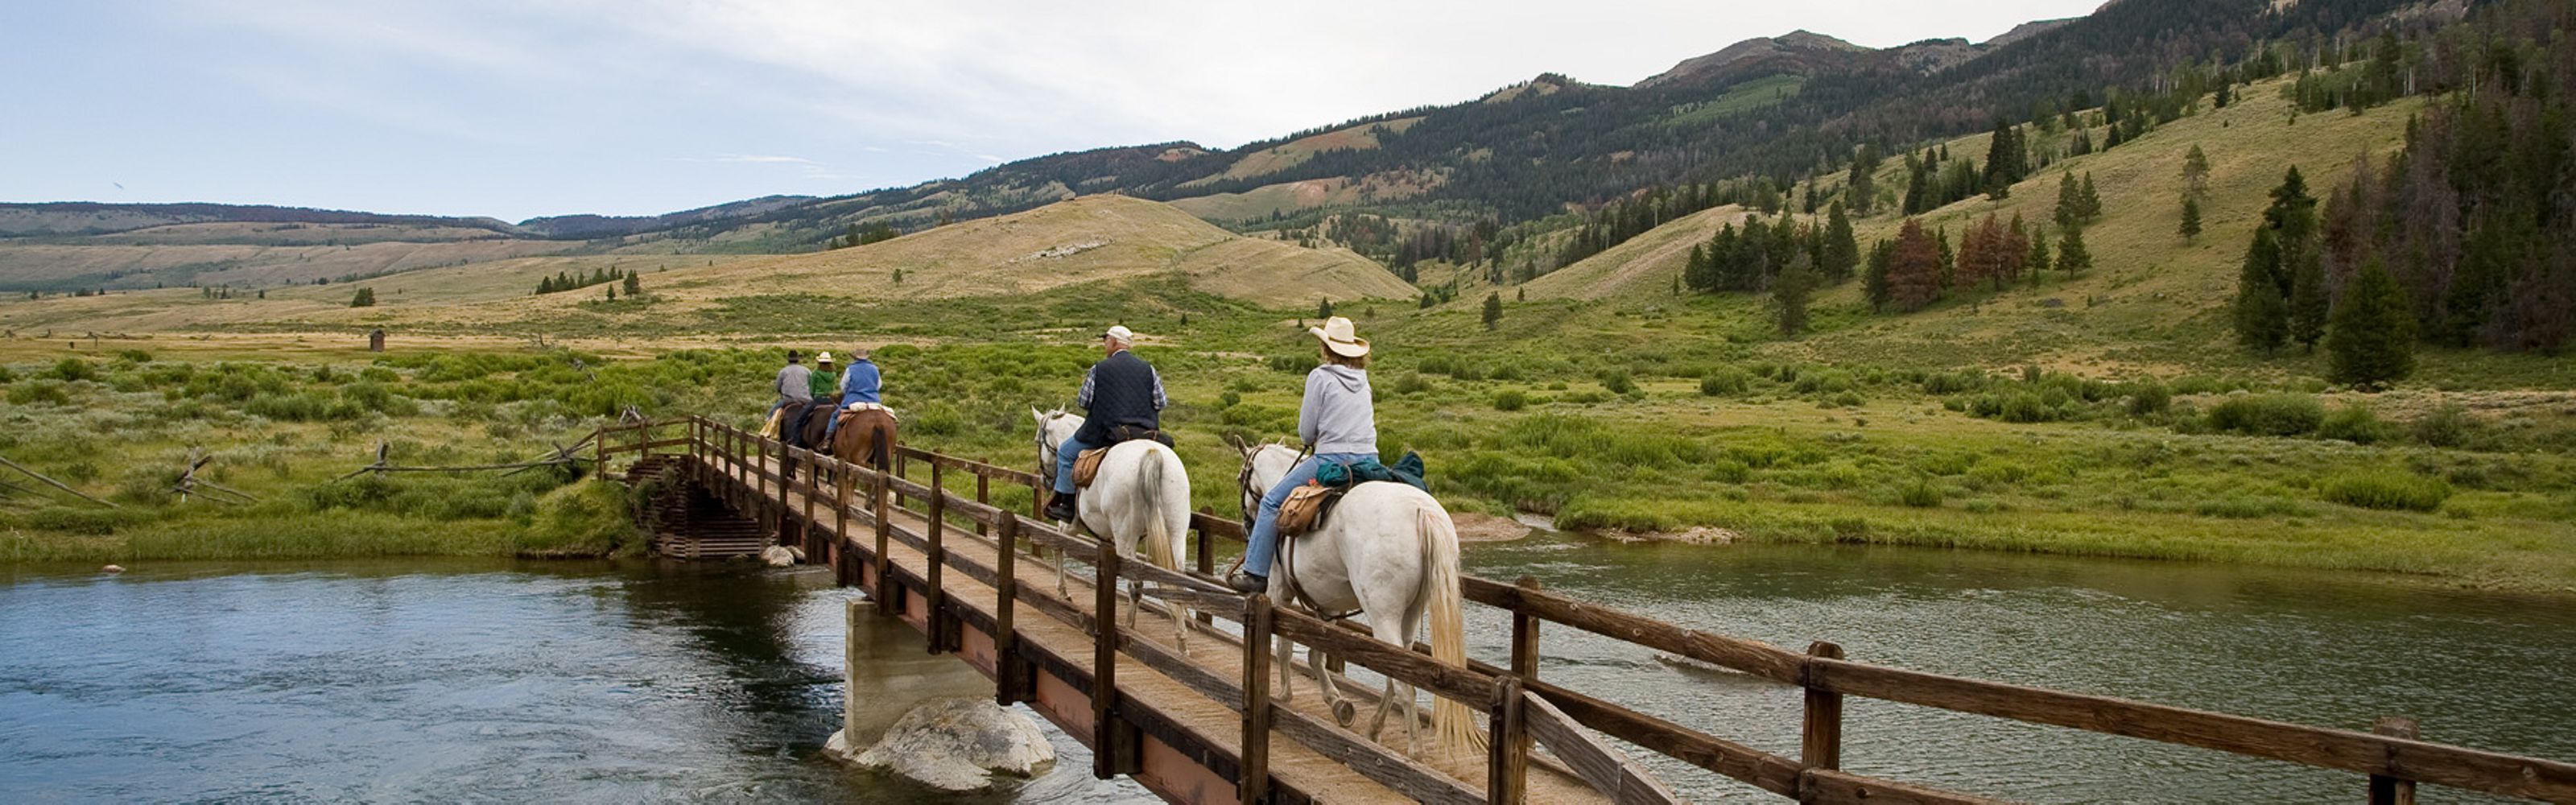 Five people on horseback cross a narrow wooden bridge over a stream, with green rolling hills and mountains in the background.